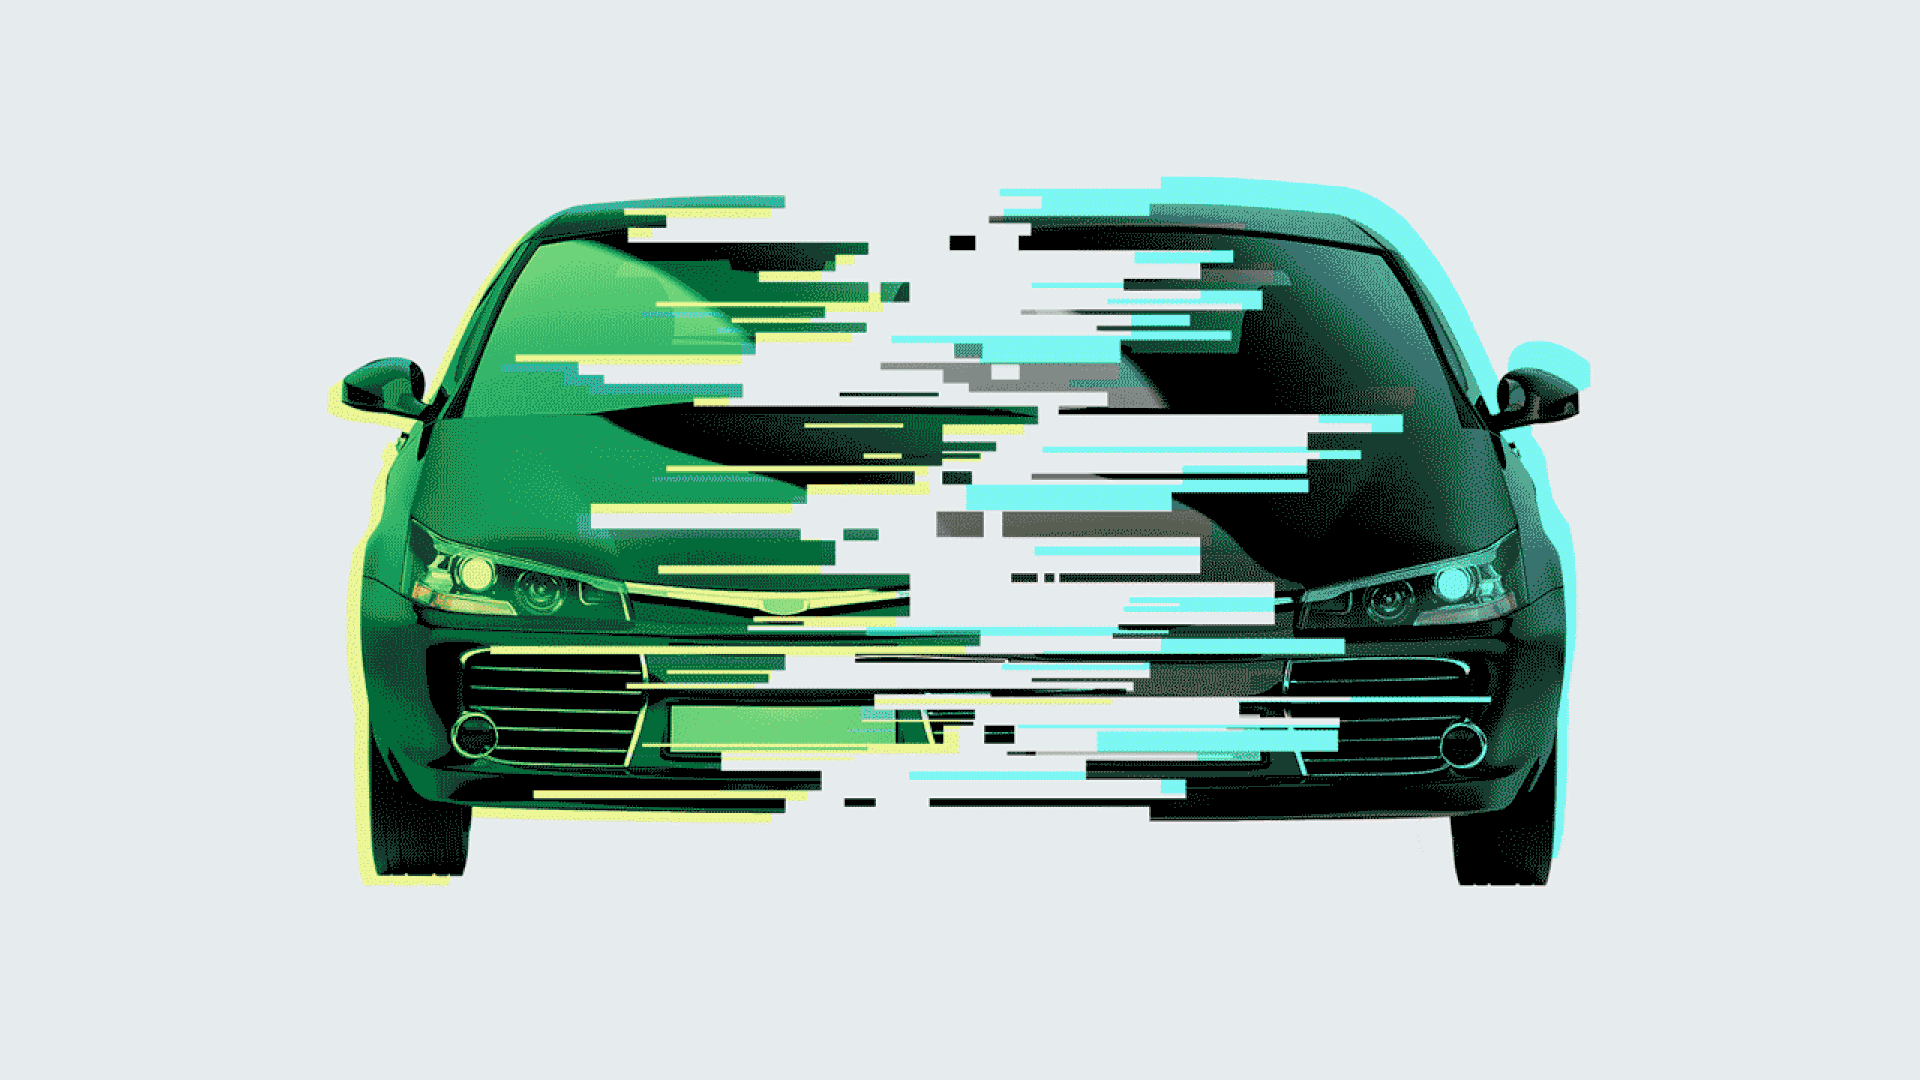 In this animated illustration, two halves of a sedan repeatedly fuse together in a blue and green light.